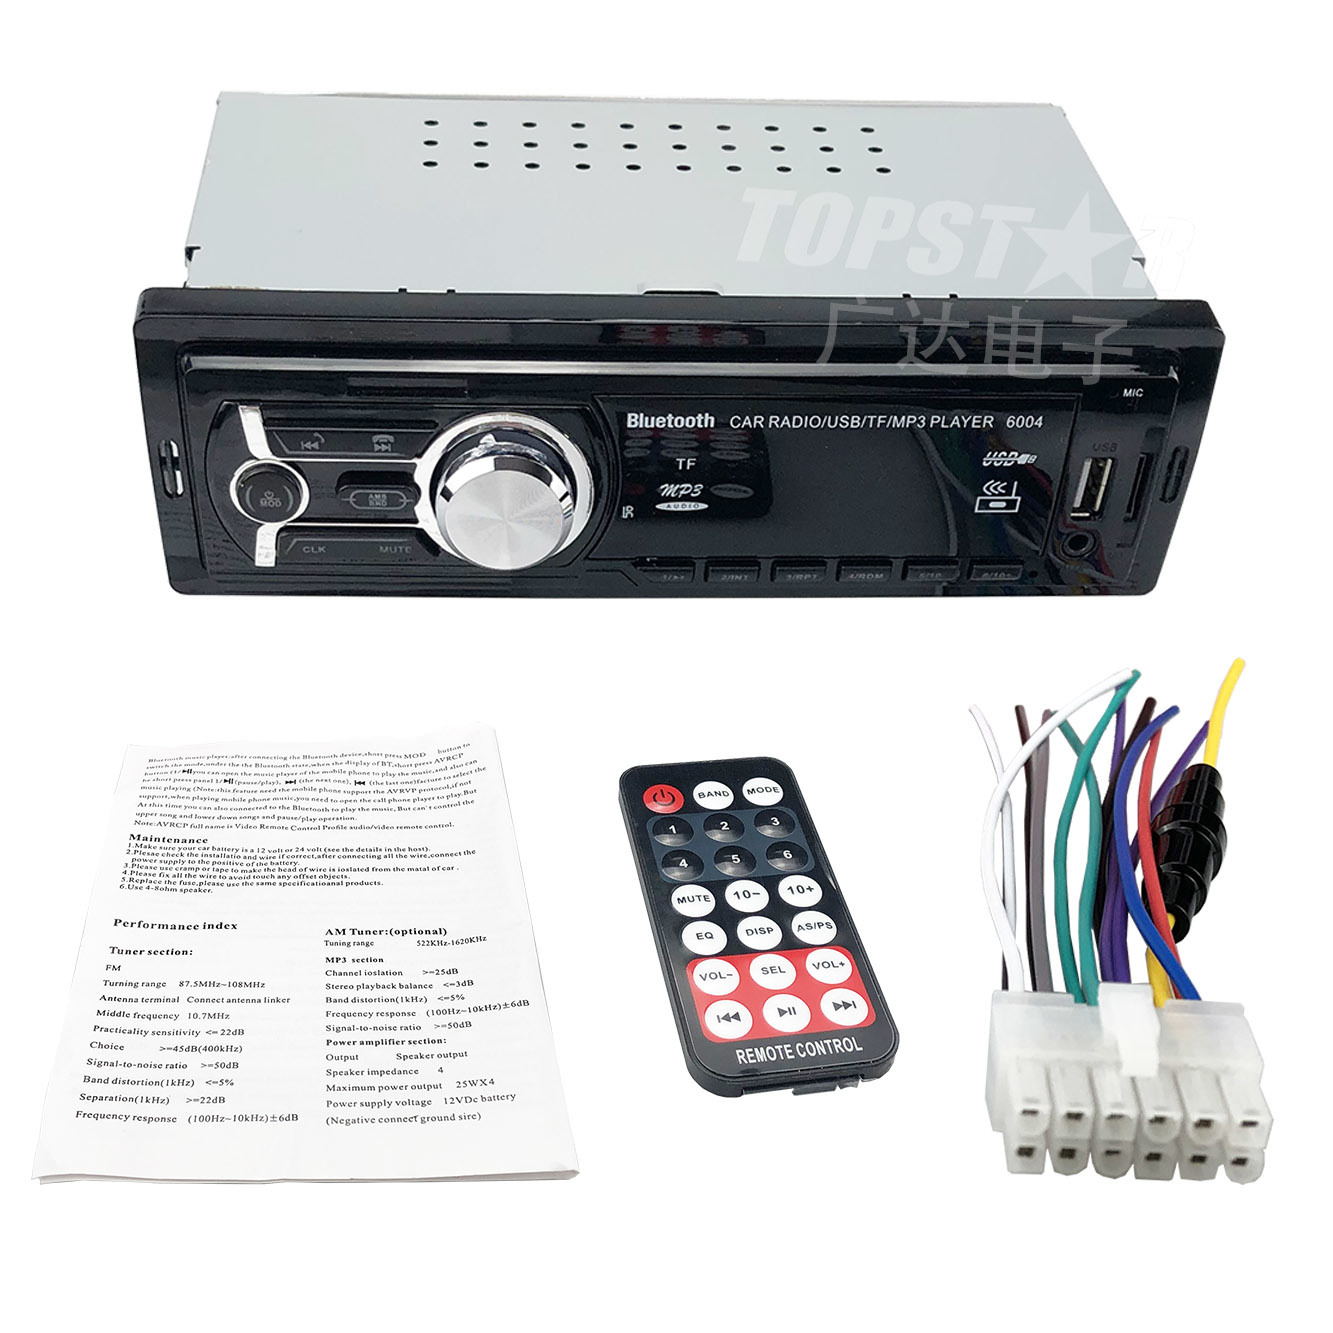 MP3 Player for Car Stereo Car Video Player Car MP3 Audio Auto Stereo Car Audio Fixed Panel Car MP3 Stereo Player